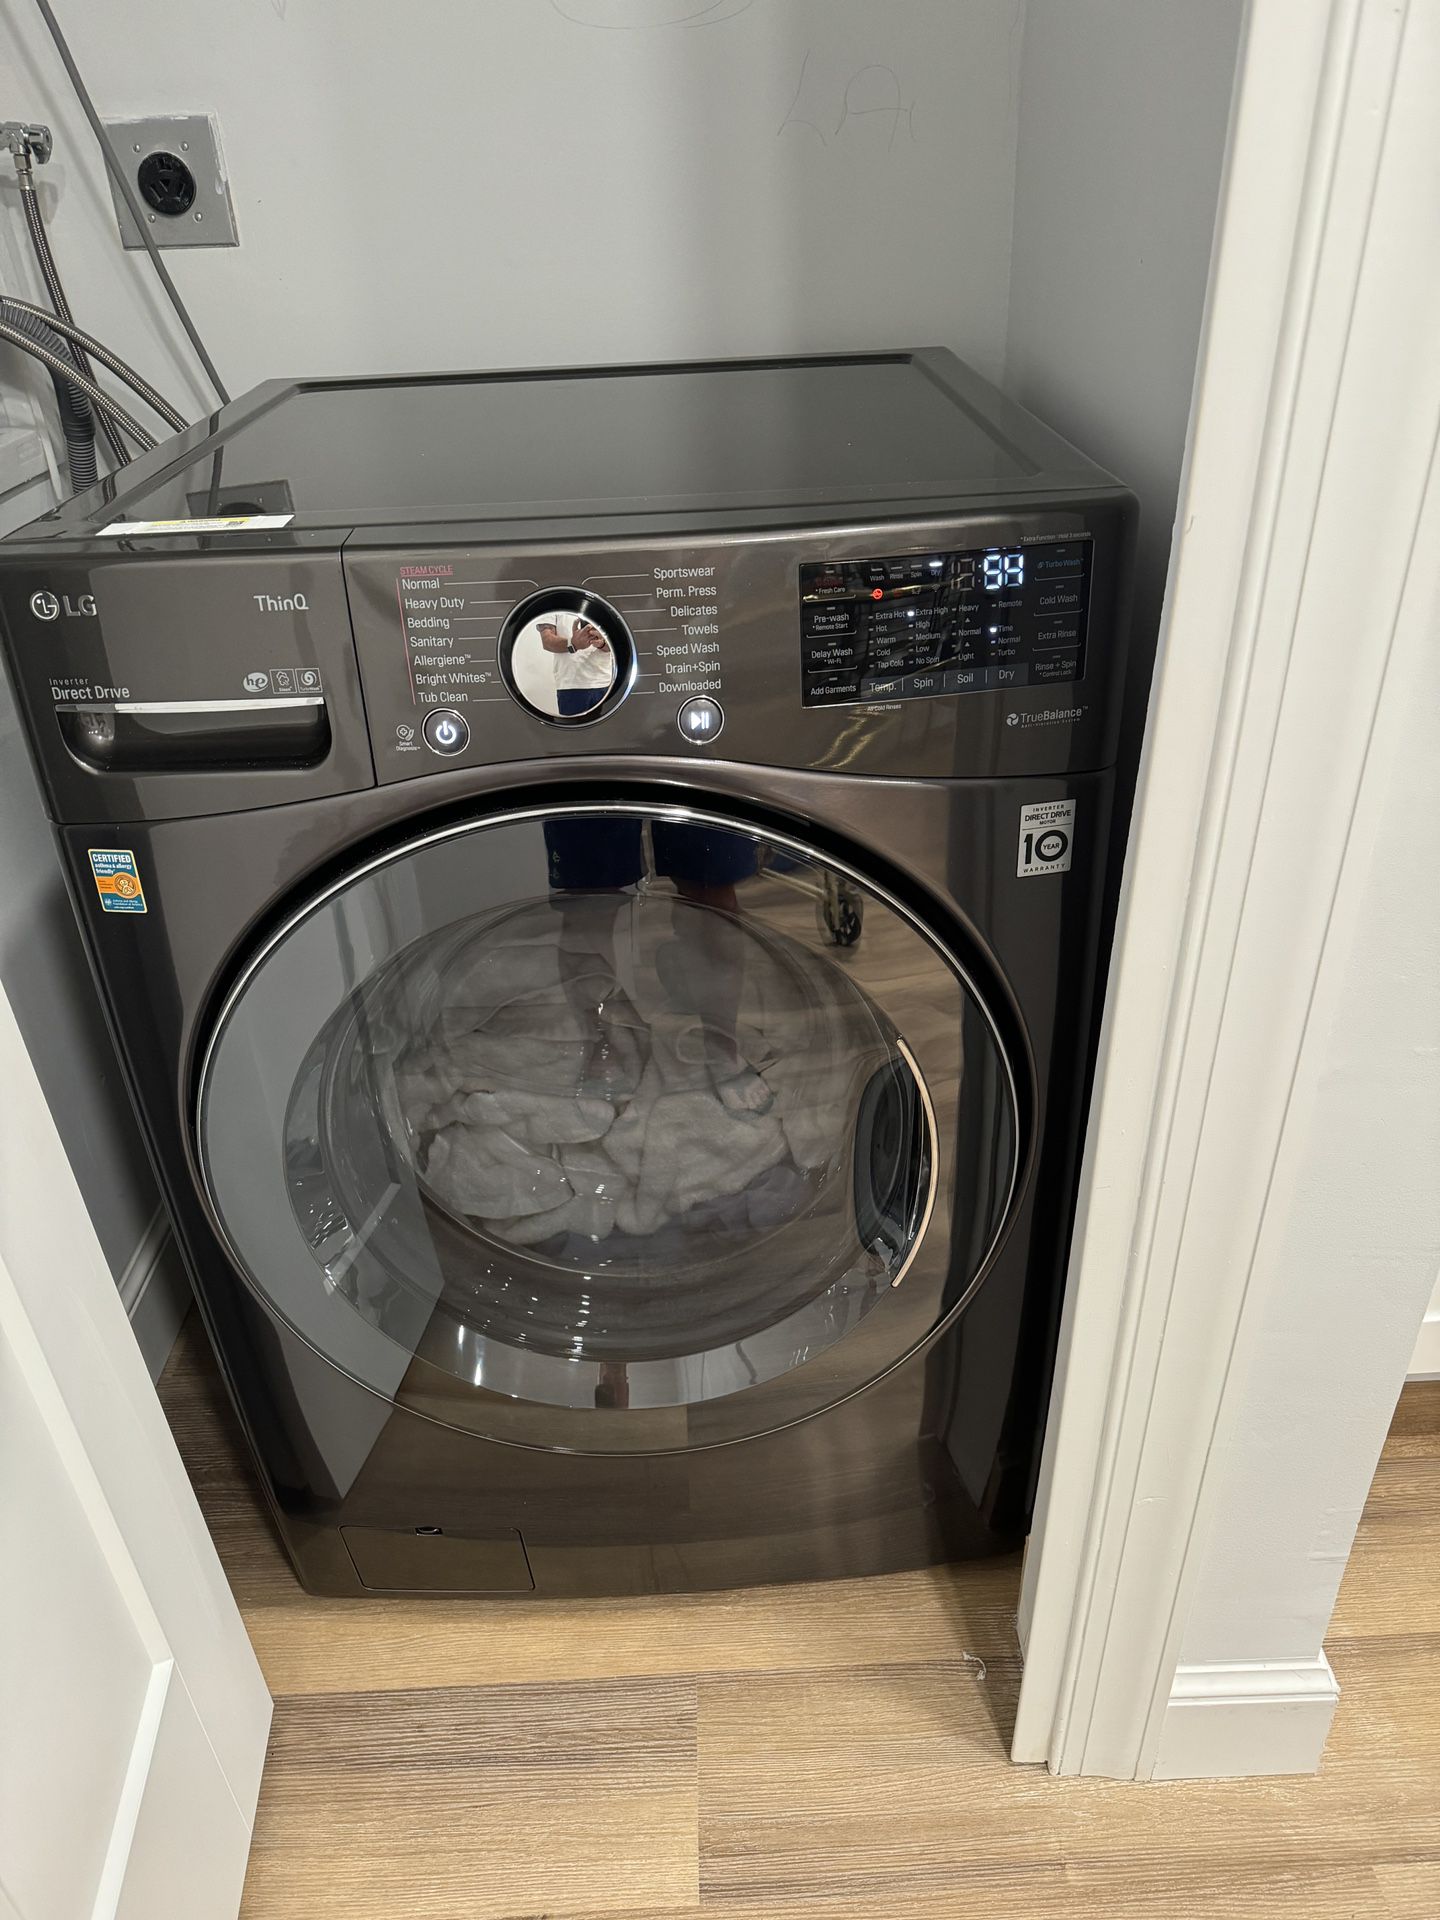 LG All In One Washer dryer. Latest Tech!